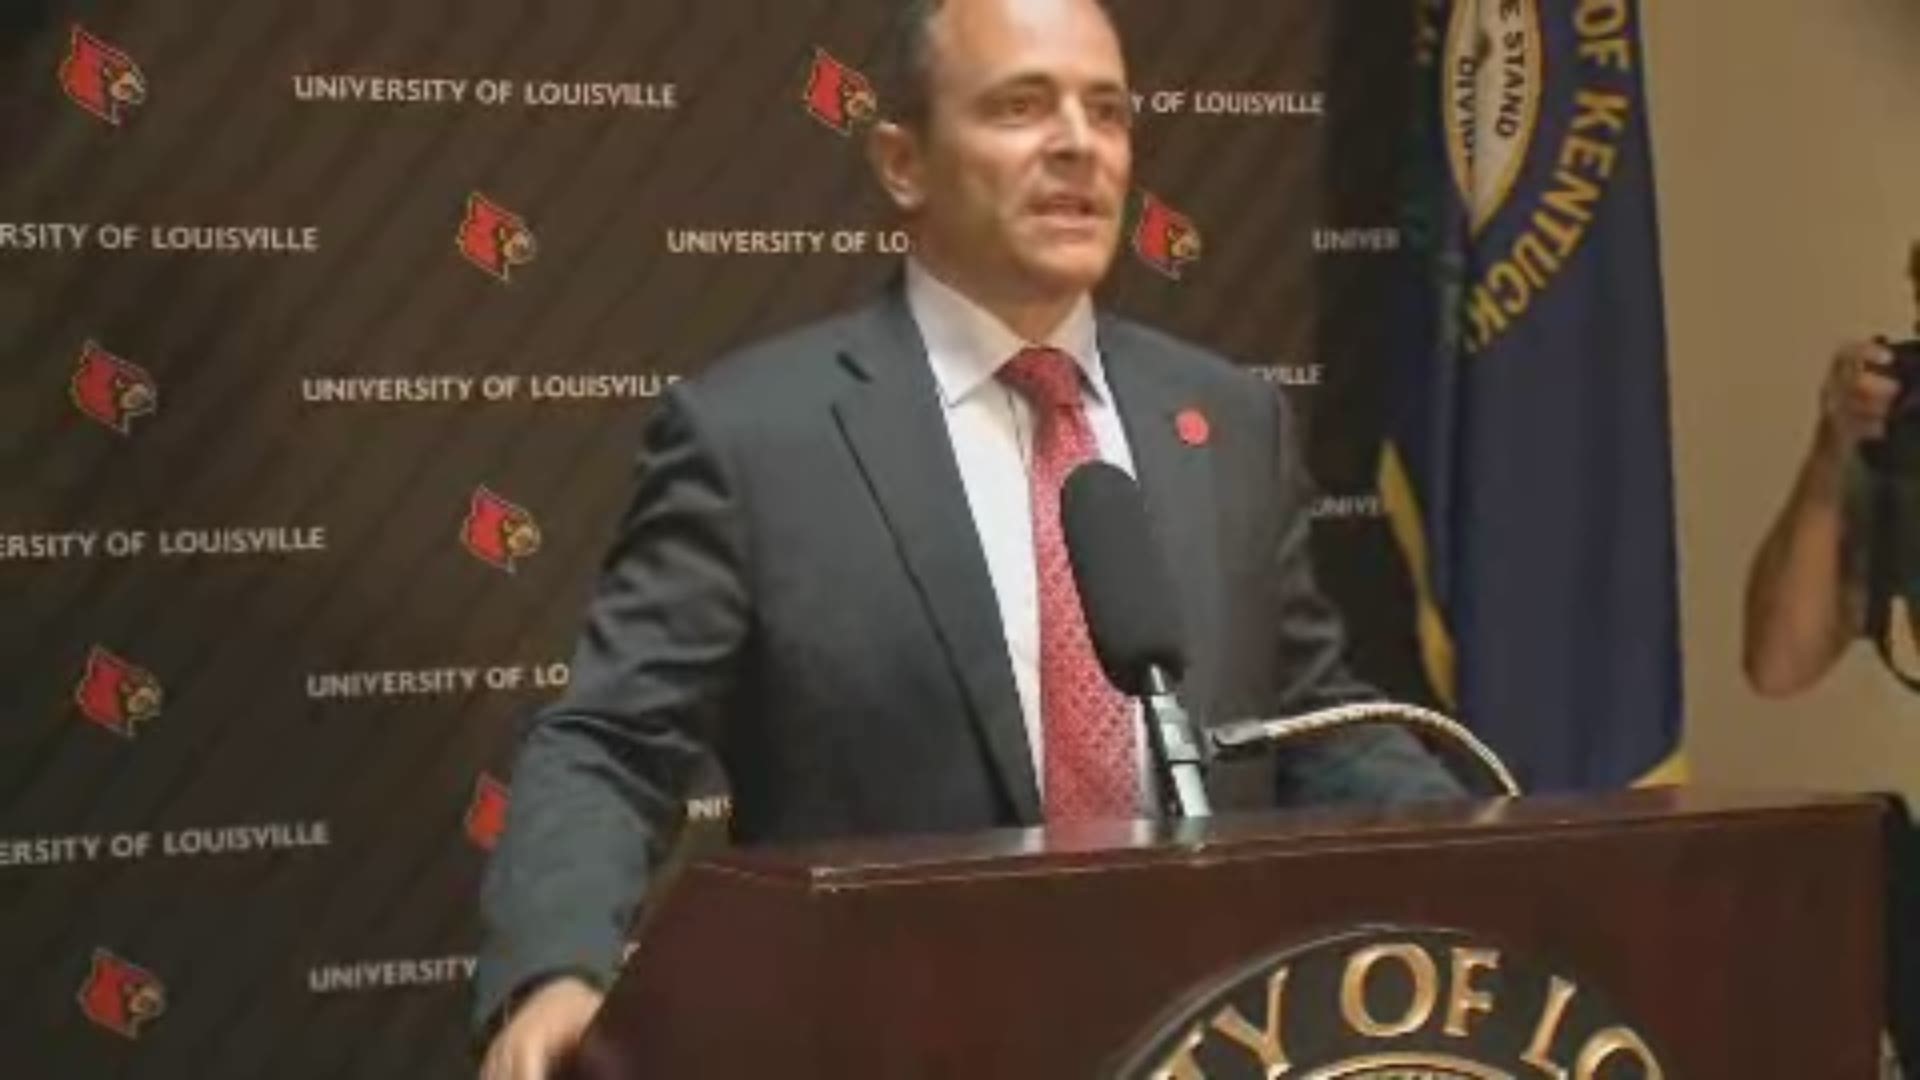 Bevin said this deal is in part because of UofL President Neeli Bendapudi.